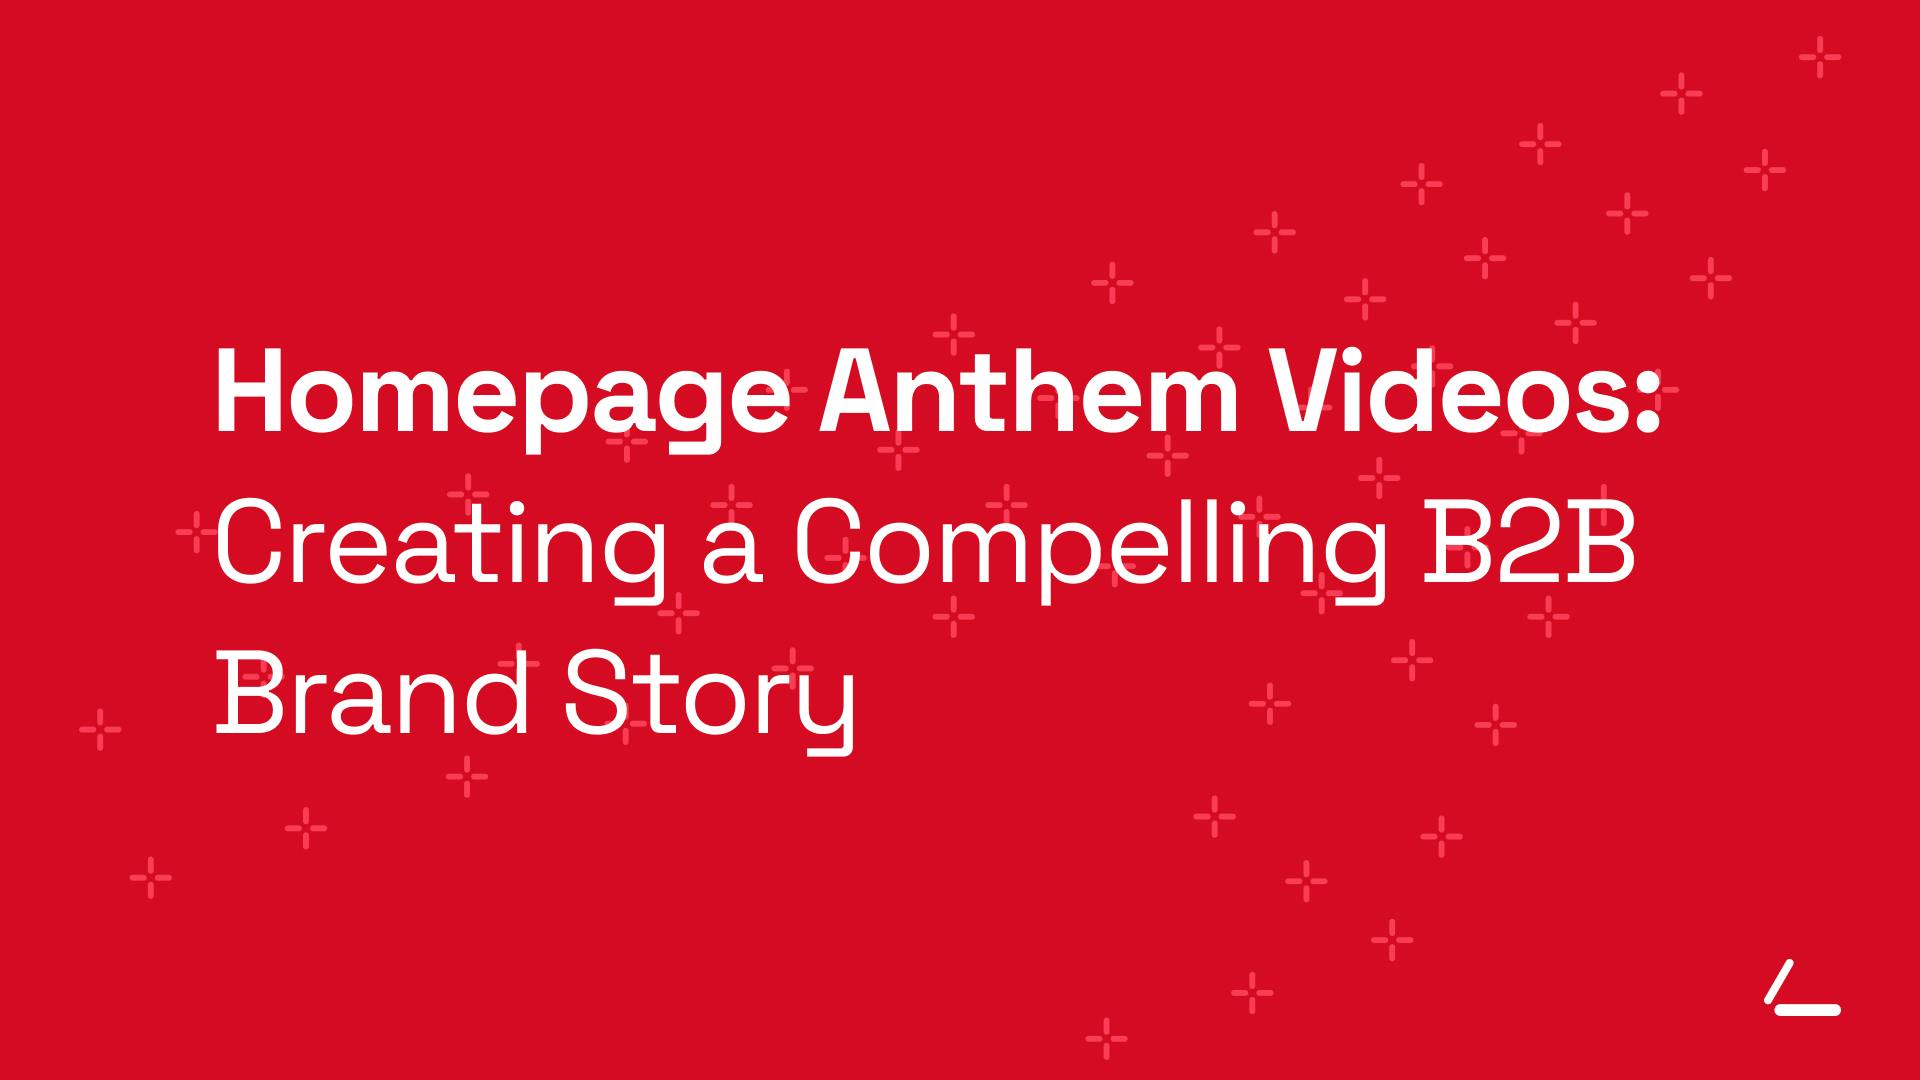 SEO Article Header - Red background with text about Homepage Anthem Videos